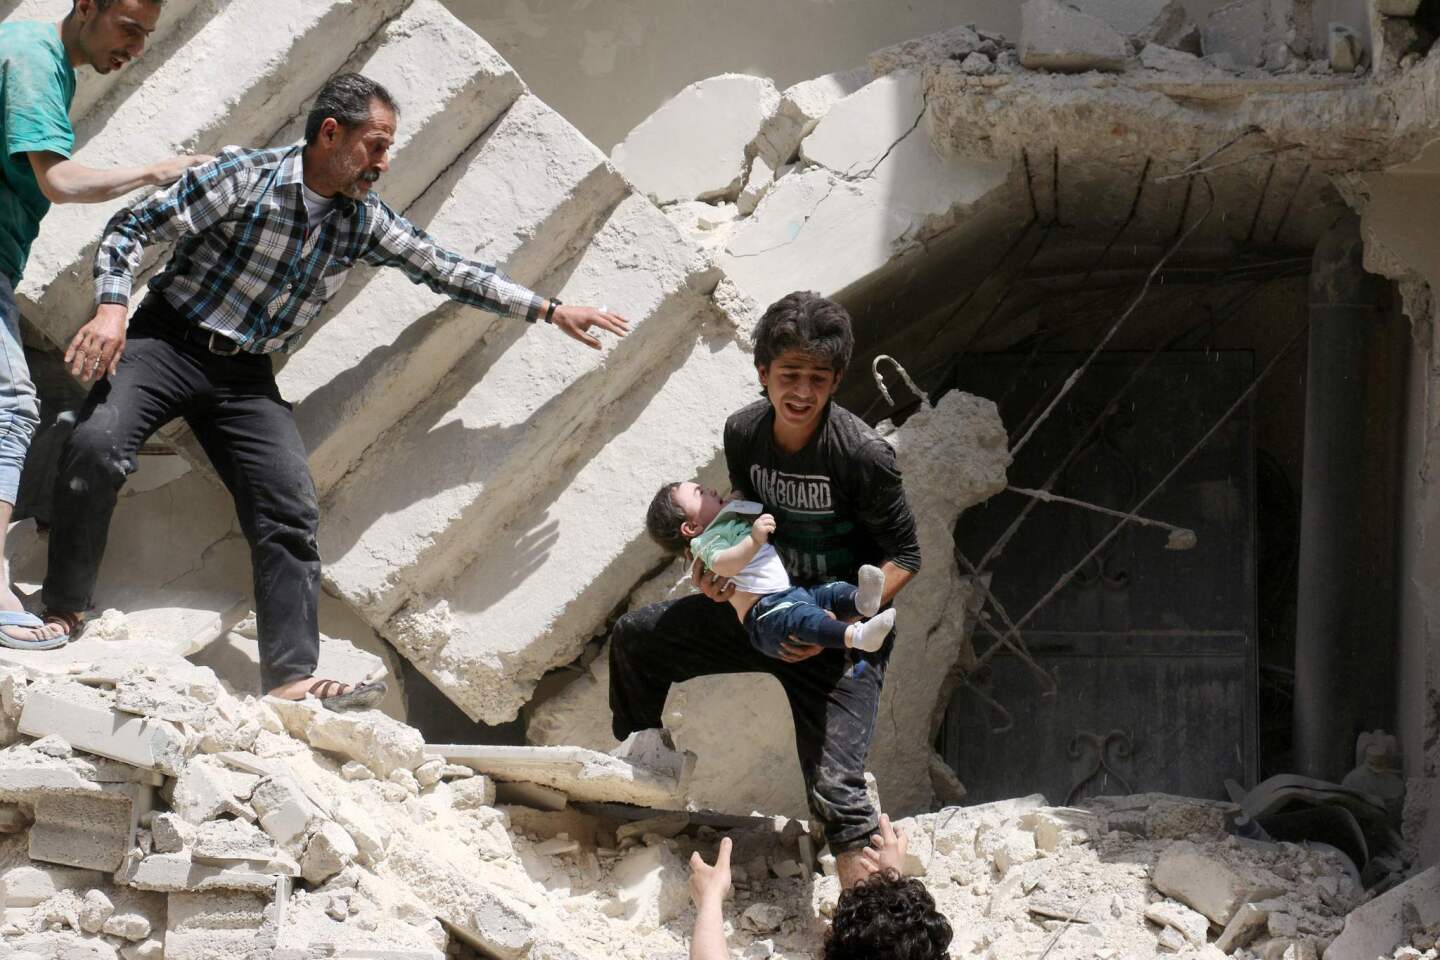 Syrians evacuate a toddler from a destroyed building after an airstrike on the rebel-held Kalasa neighborhood in the northern Syrian city of Aleppo.